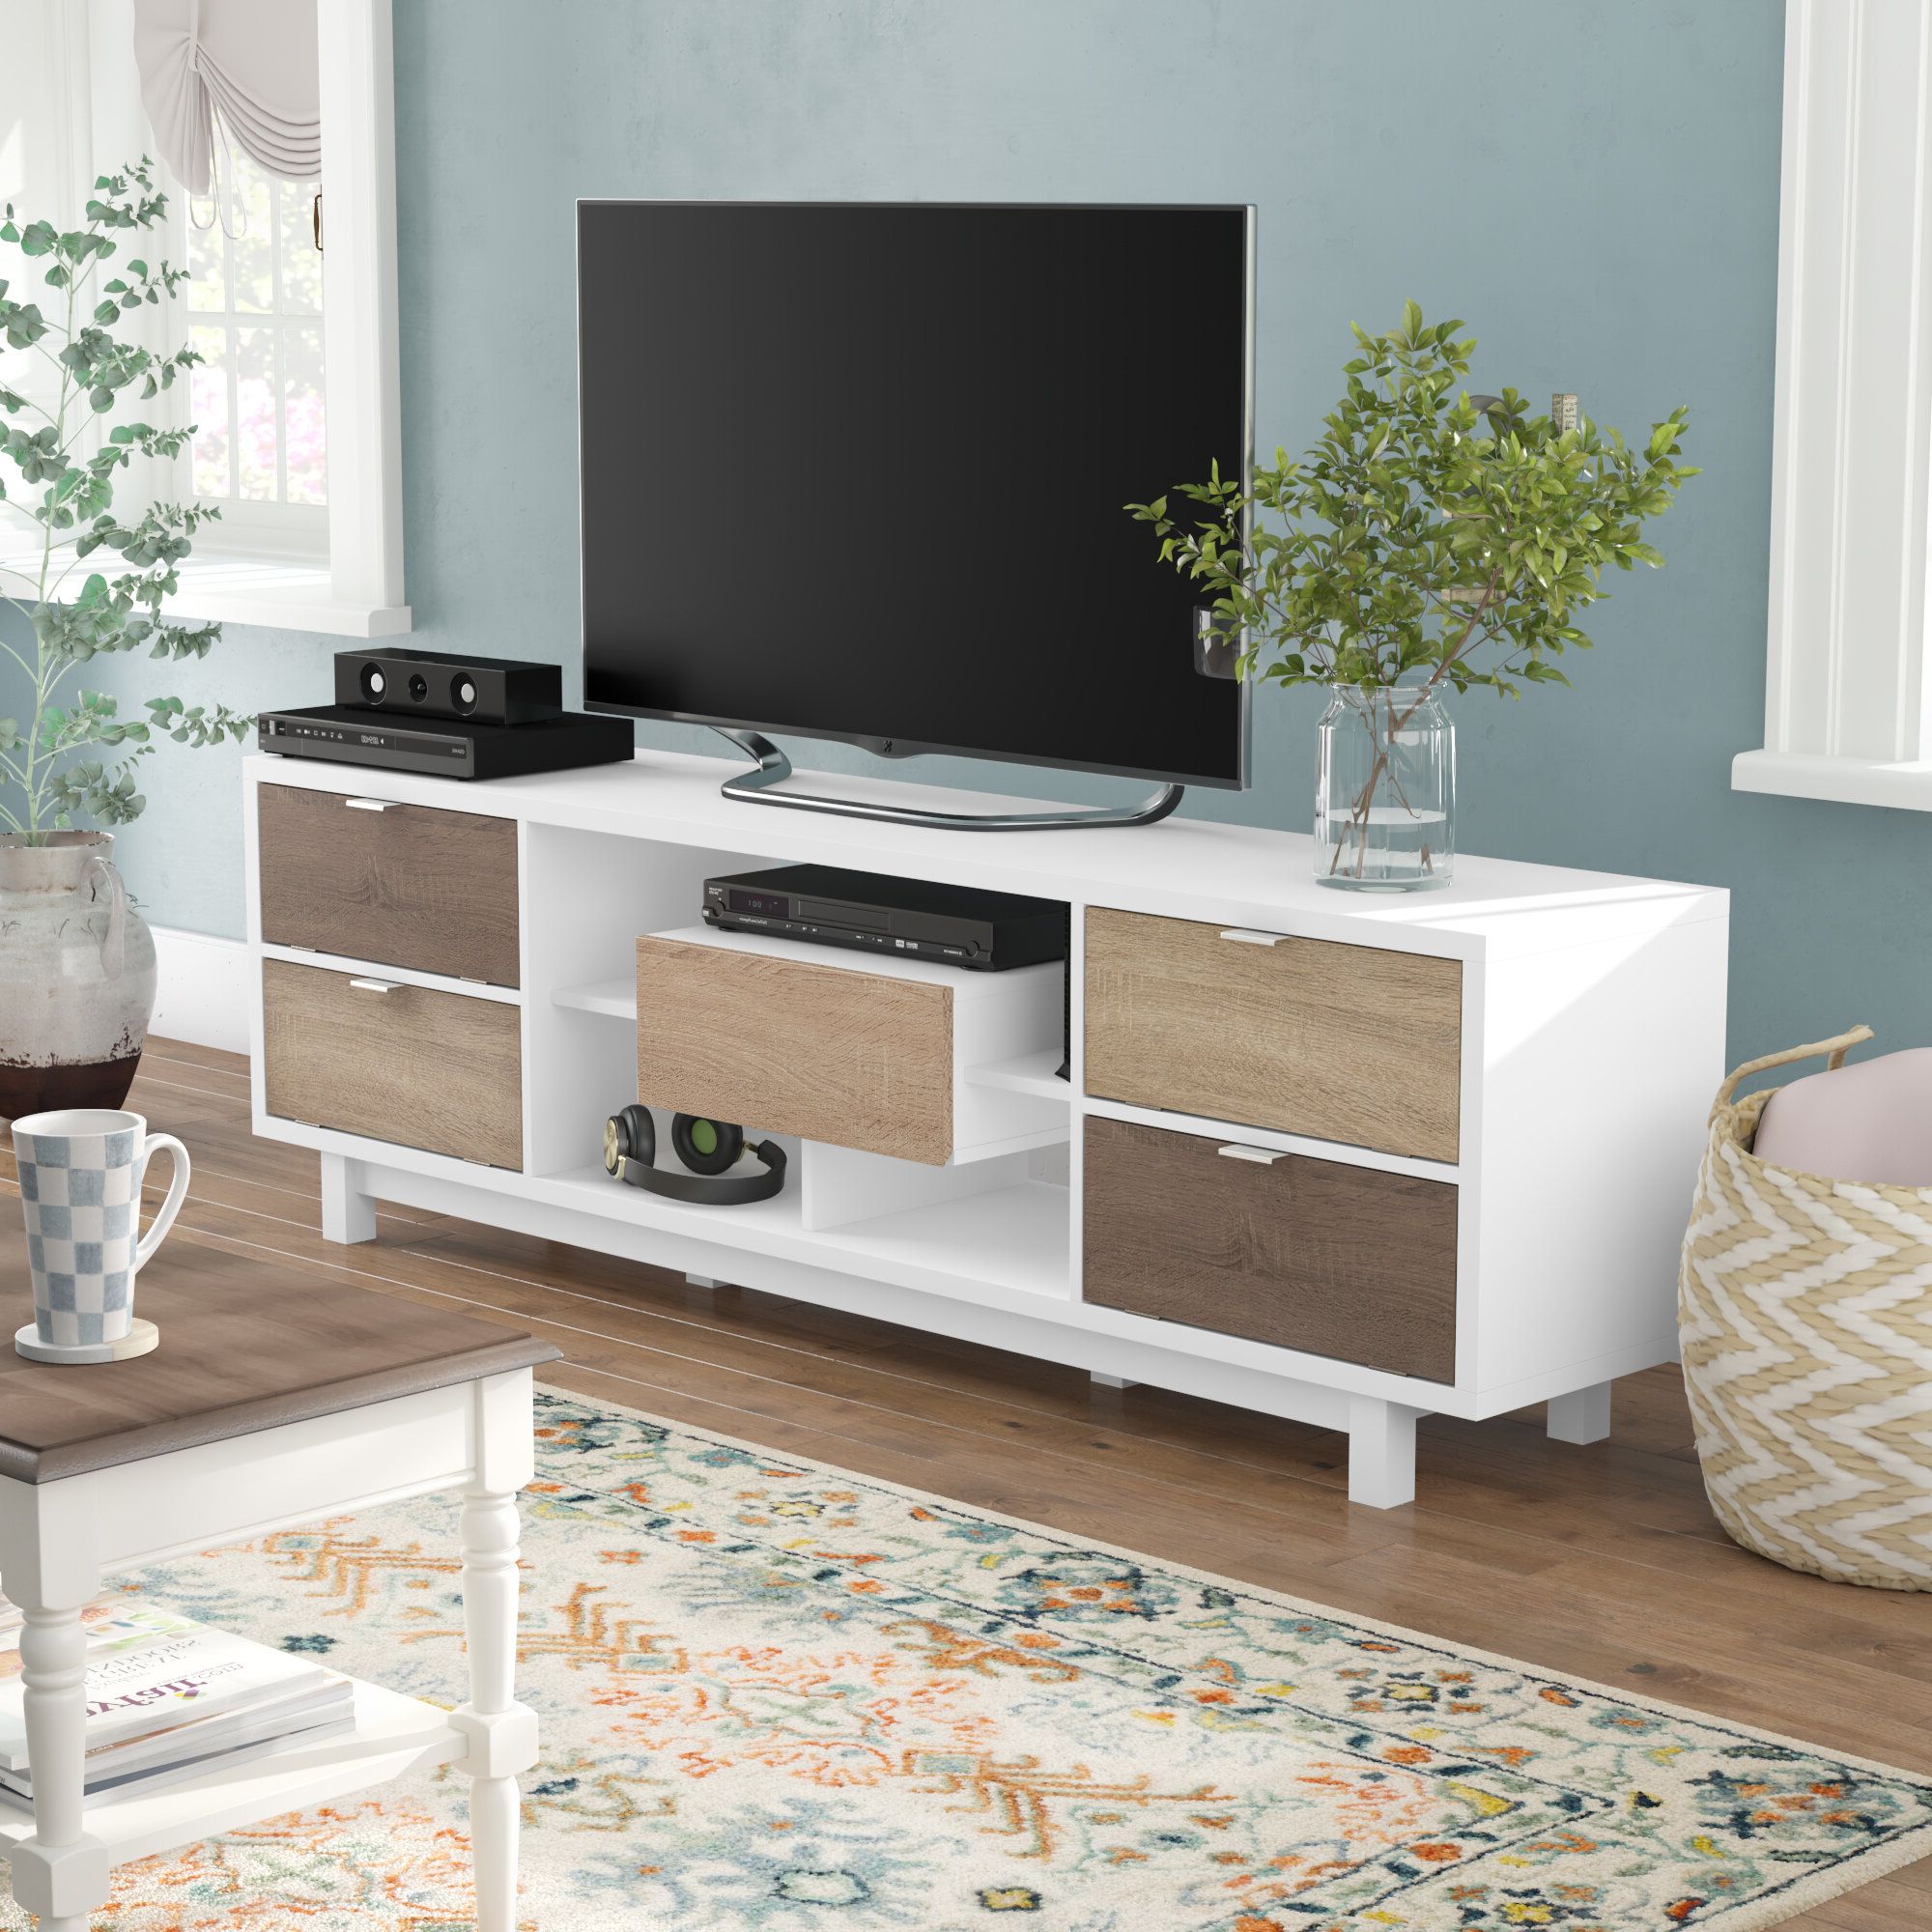 2018 Sahika Tv Stands For Tvs Up To 55" Regarding 75 Inch Long Tv Stand Table White Modern Living Room Low (View 14 of 25)